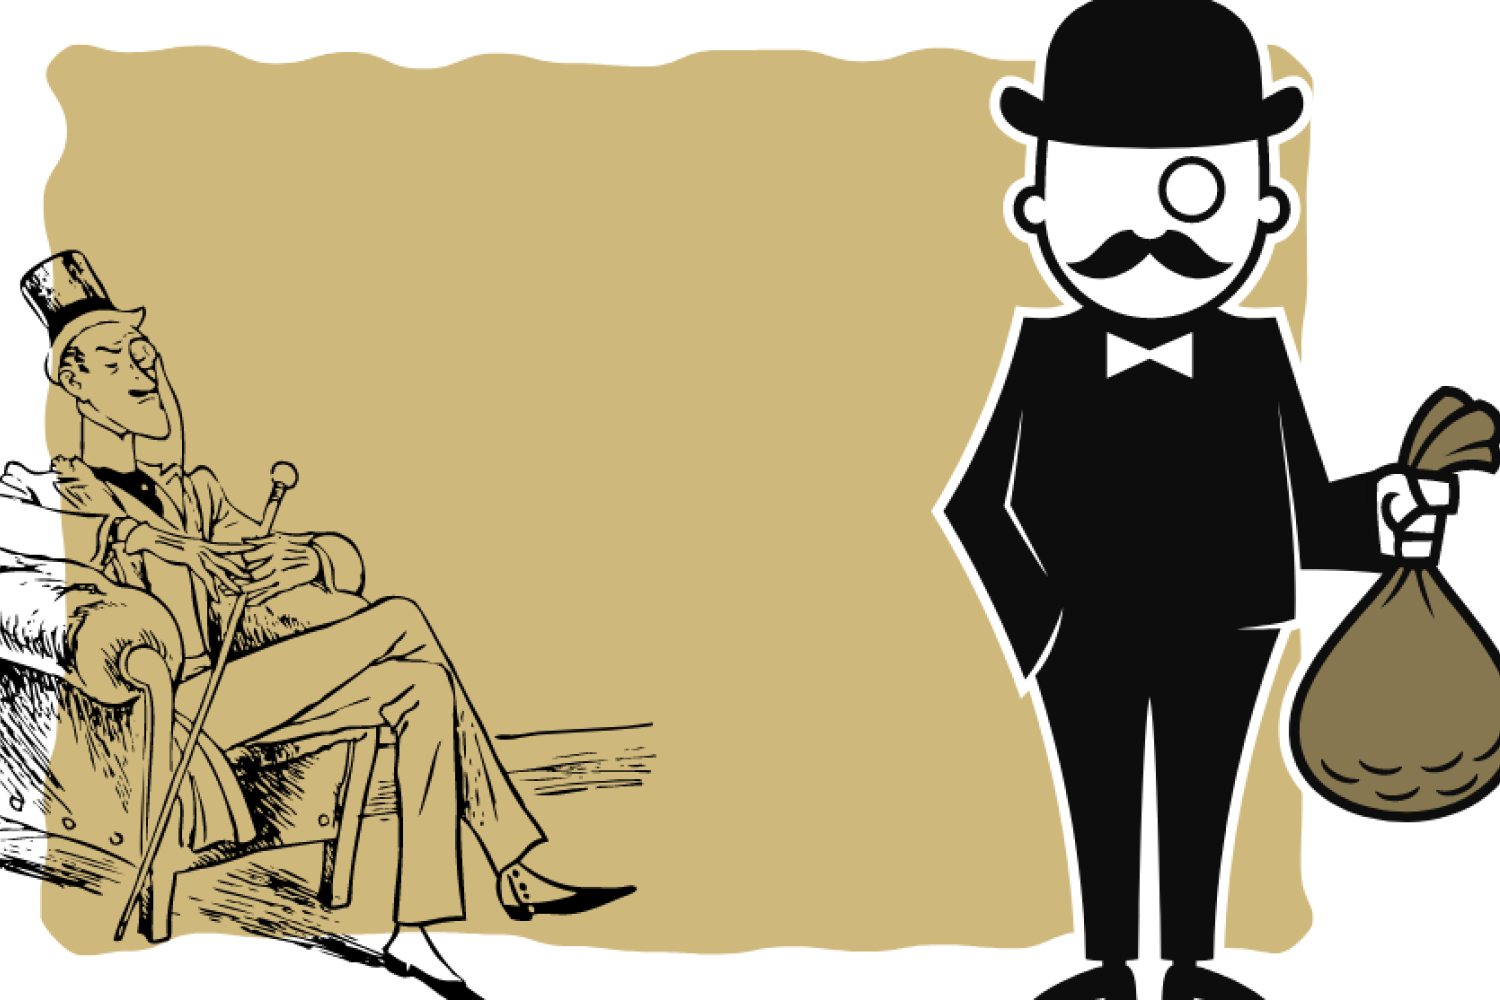 Two illustrations of men - one wearing a top-hat and holding a cane, and the other with a monocle and big bag of money.